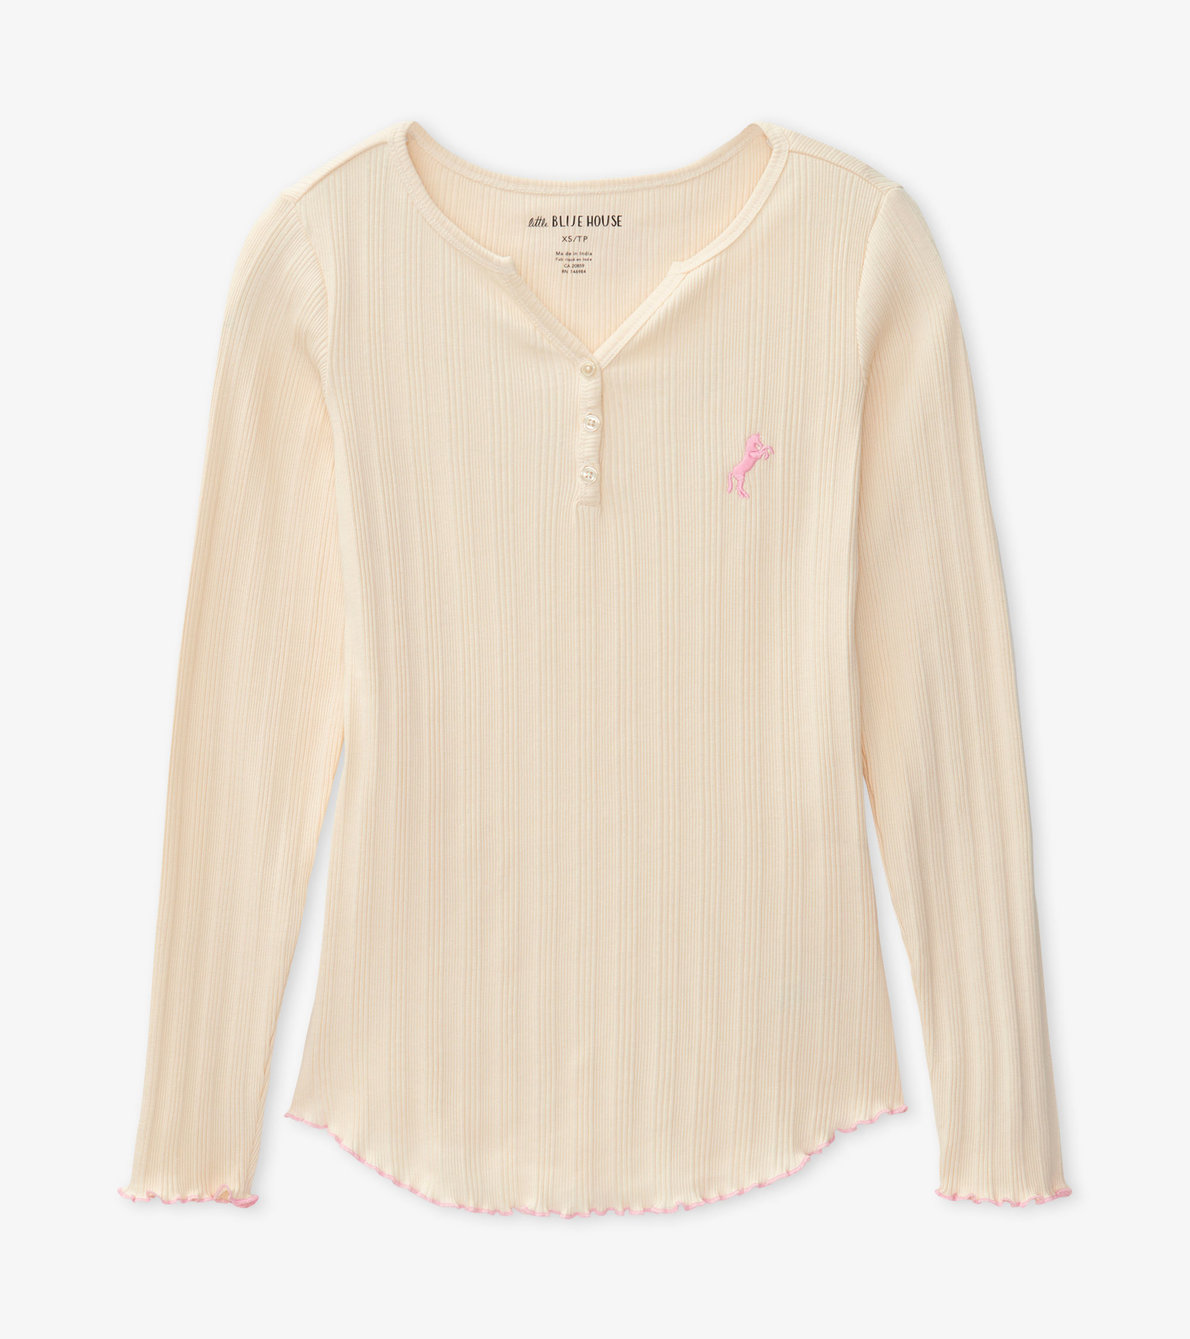 View larger image of Horse Women's Rib Long Sleeve Henley